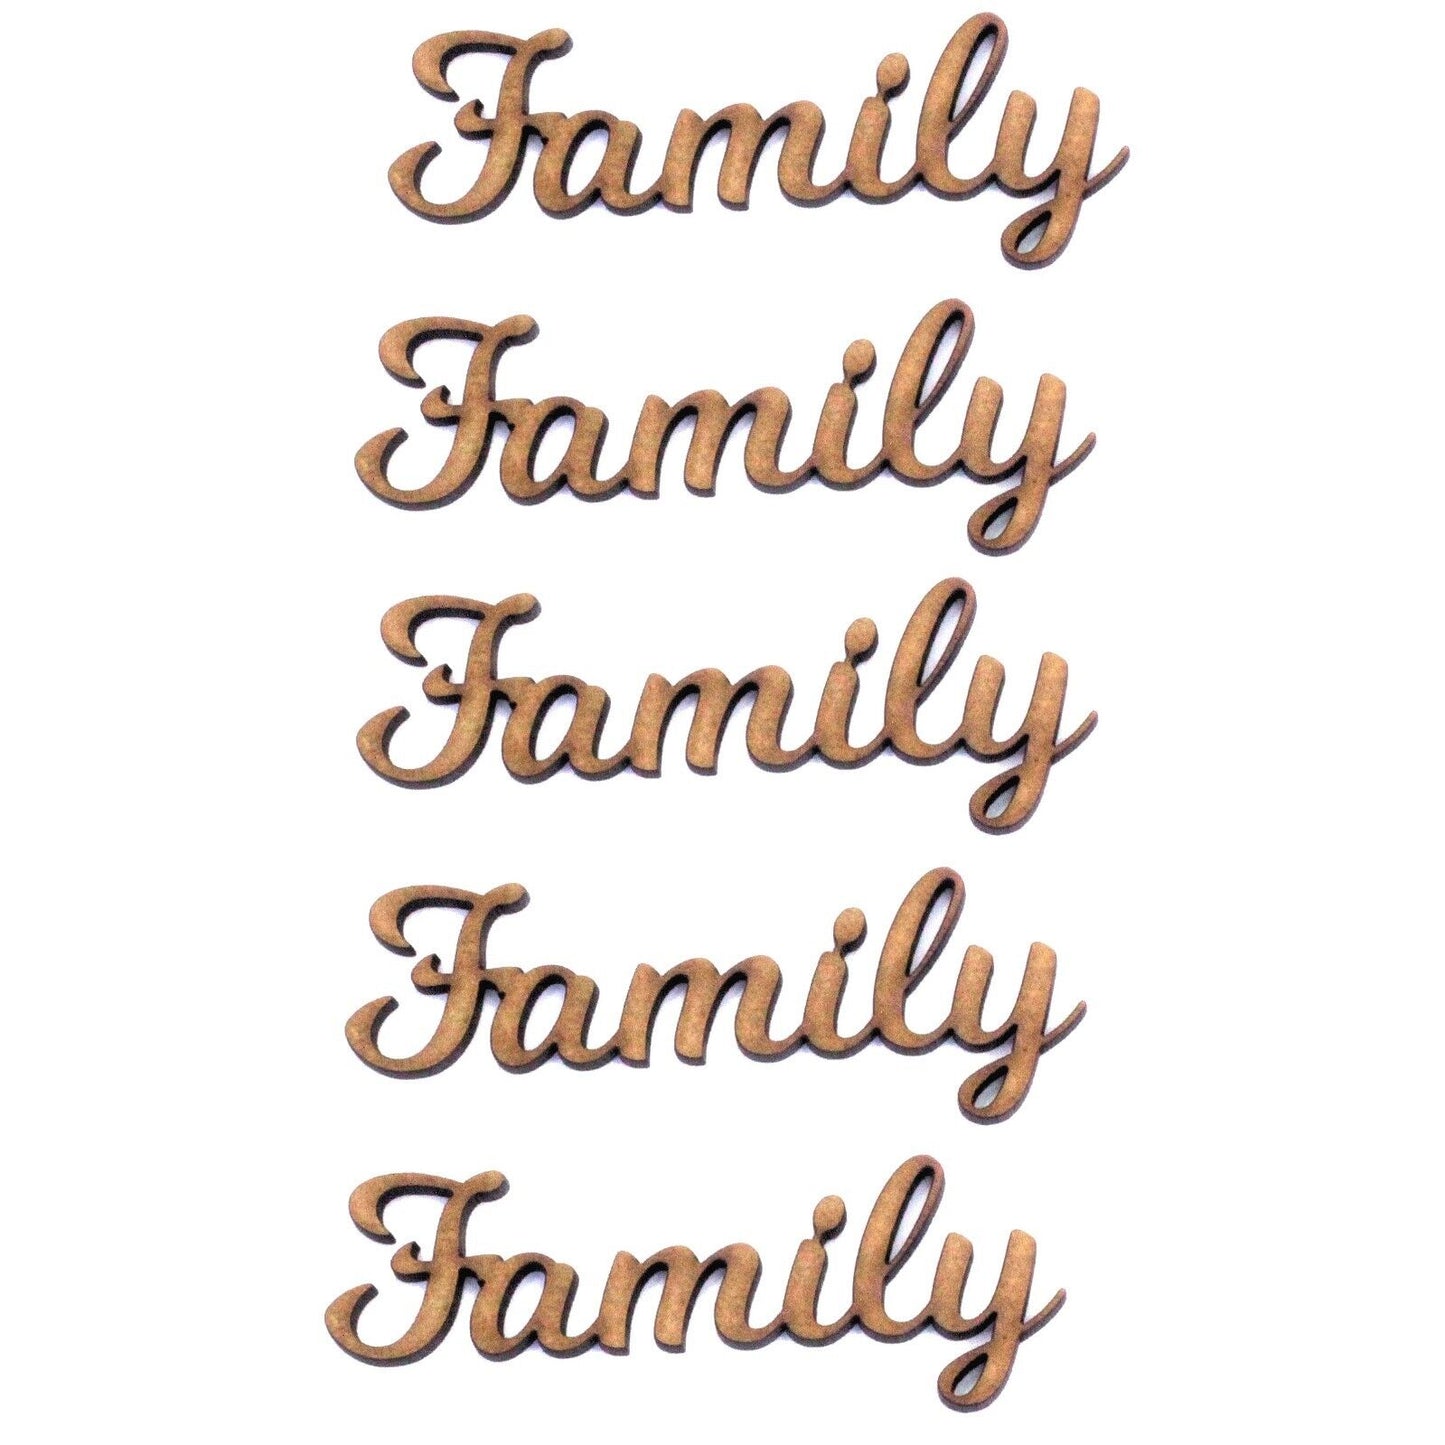 Family Word Craft Shape 5 Pack, 2mm MDF Wood. - 5 Pack. For family tree crafting